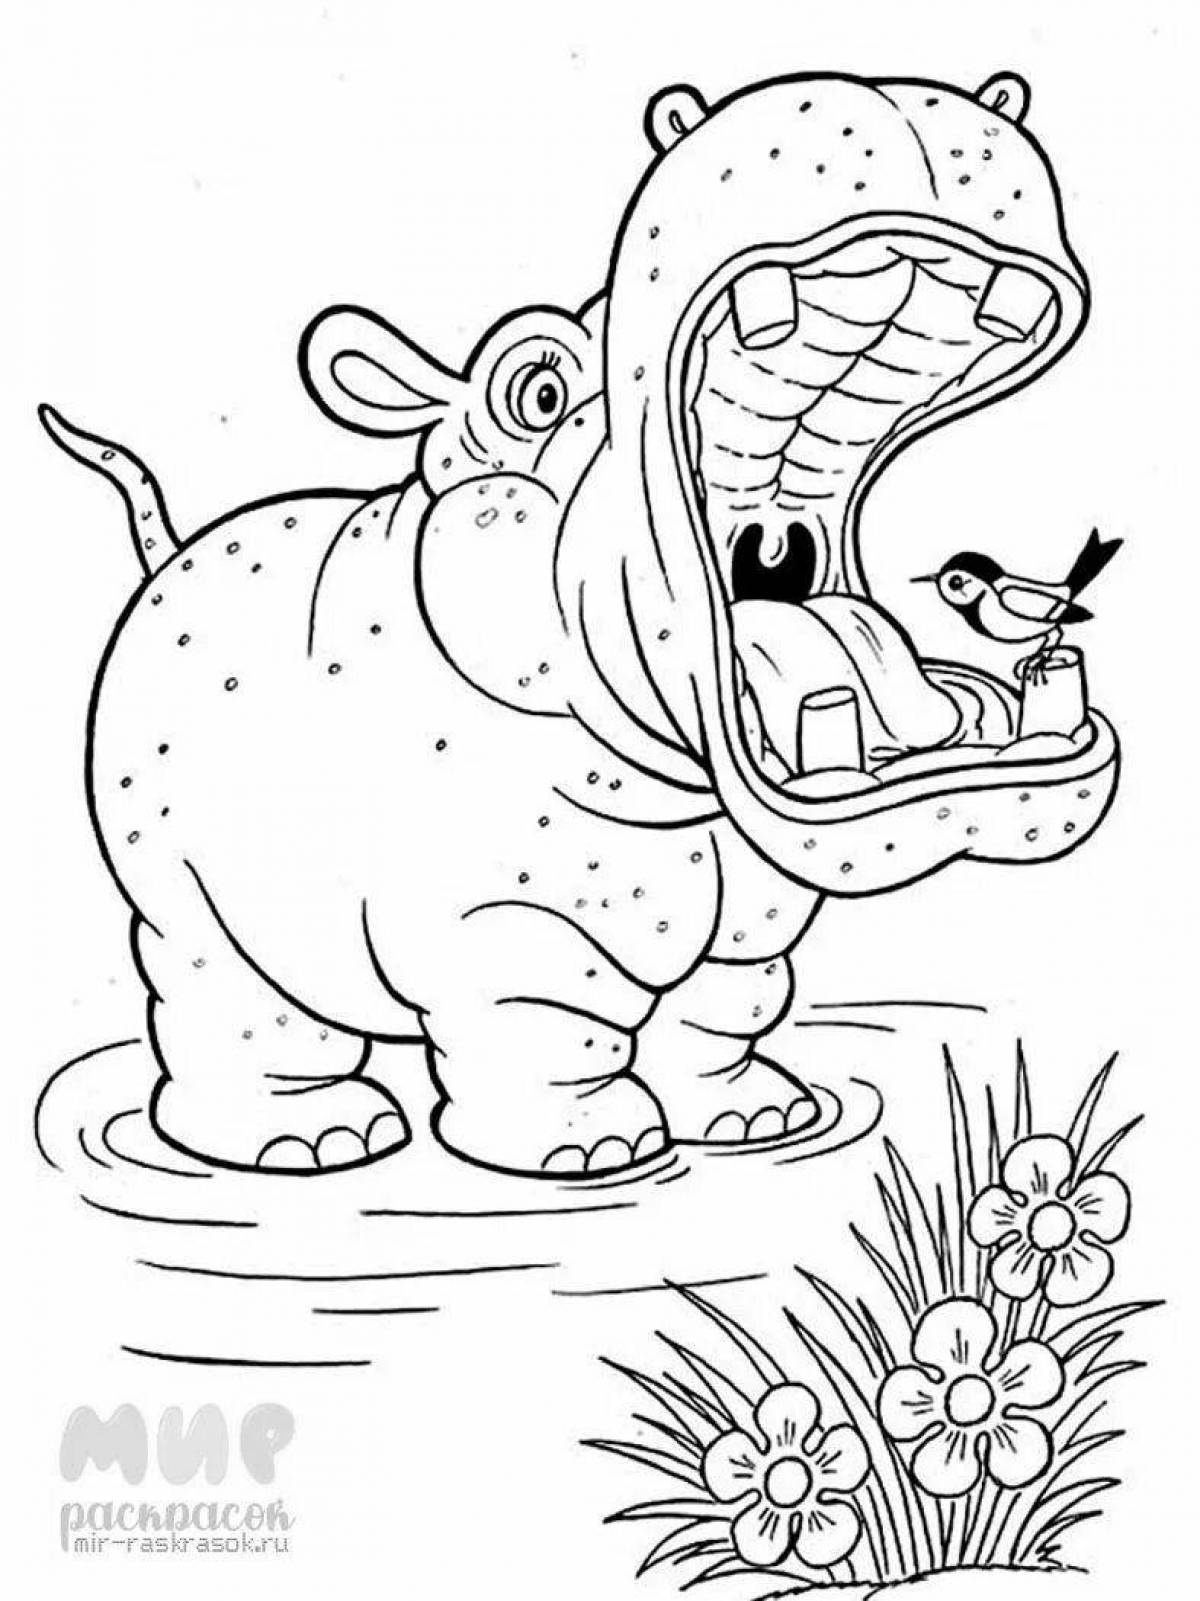 Incredible hippo coloring book for kids